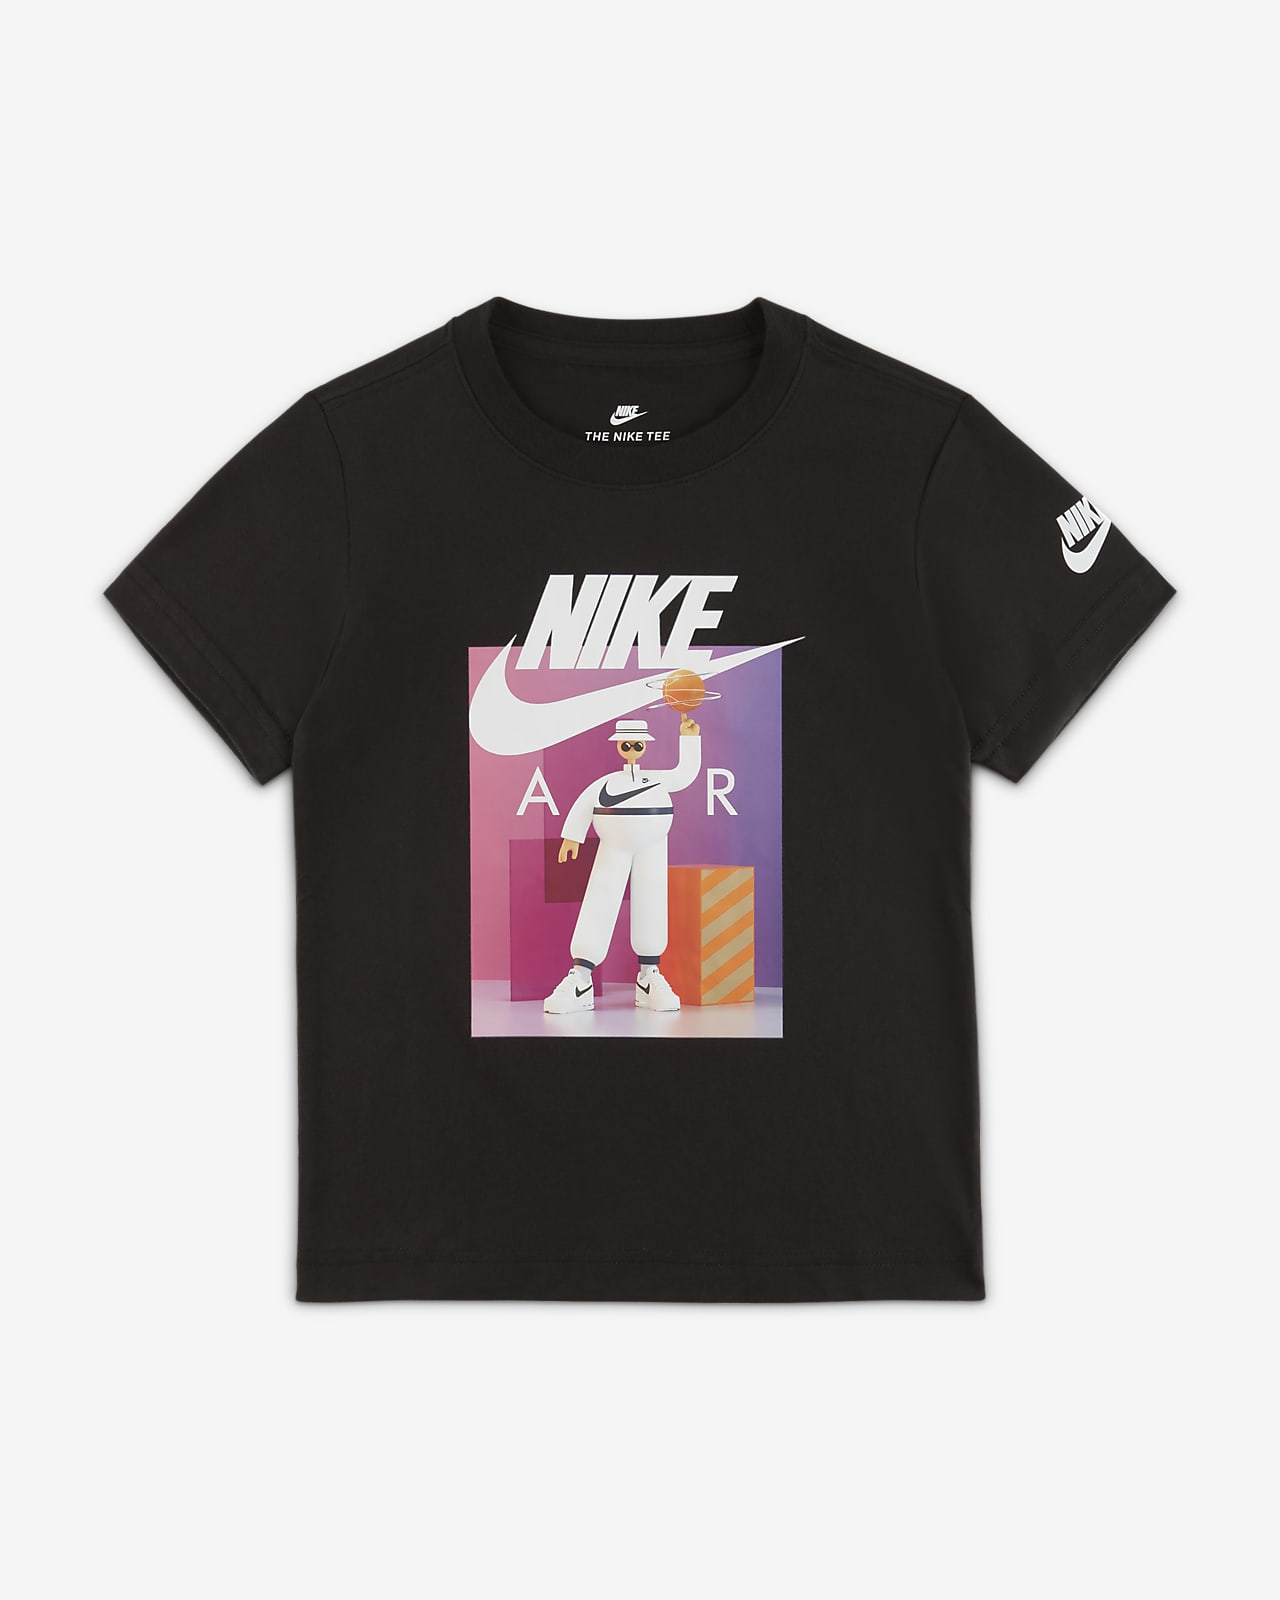 the nike tee air, OFF 78%,Free Shipping,